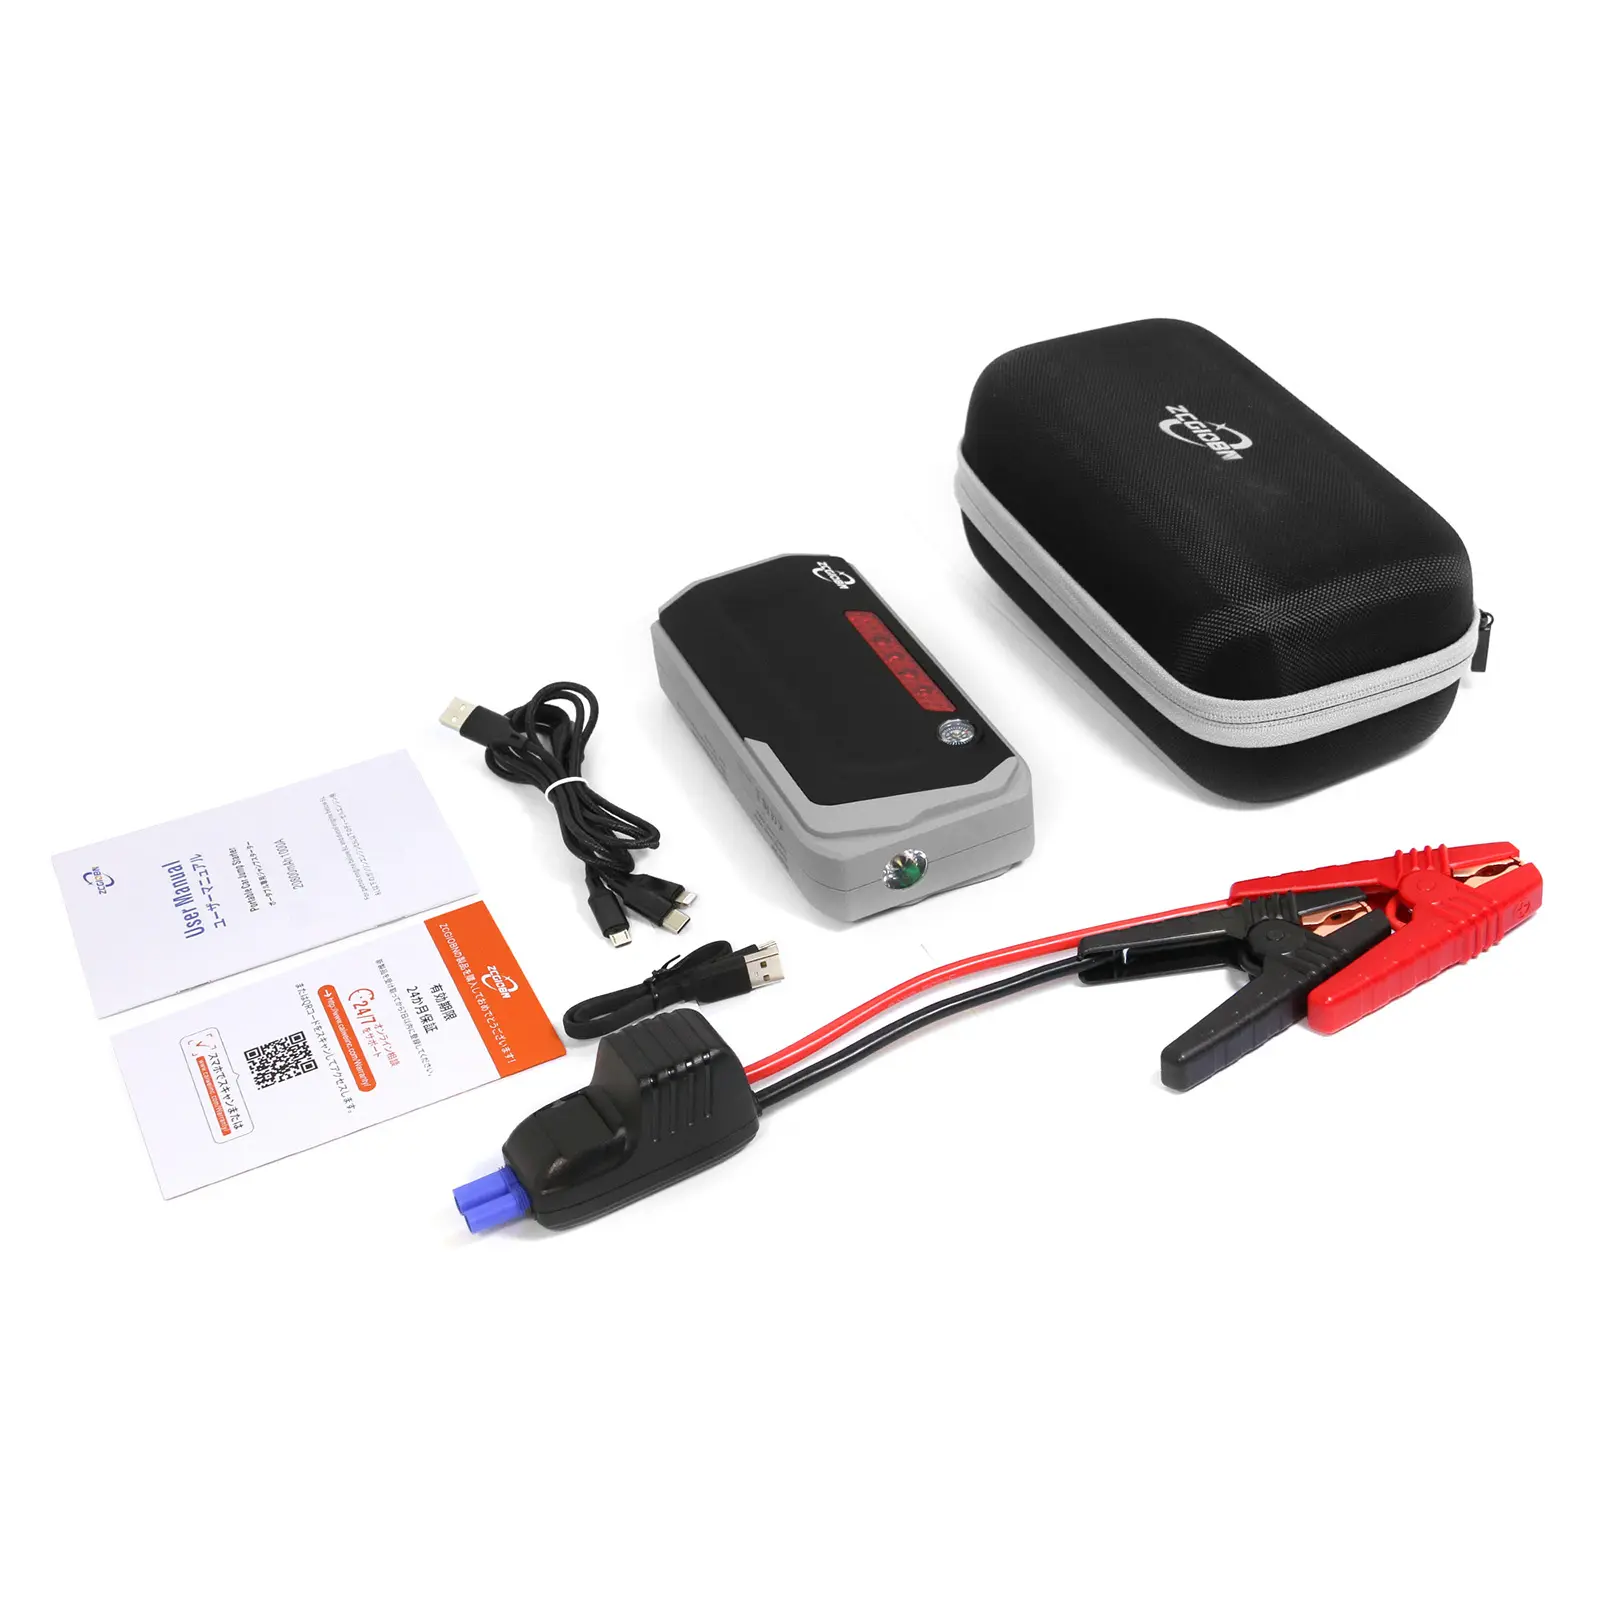 Portable Emergency Charger Power Bank Lithiumion Battery 20800mAh Car Booster Starting Device Car Jump Starter